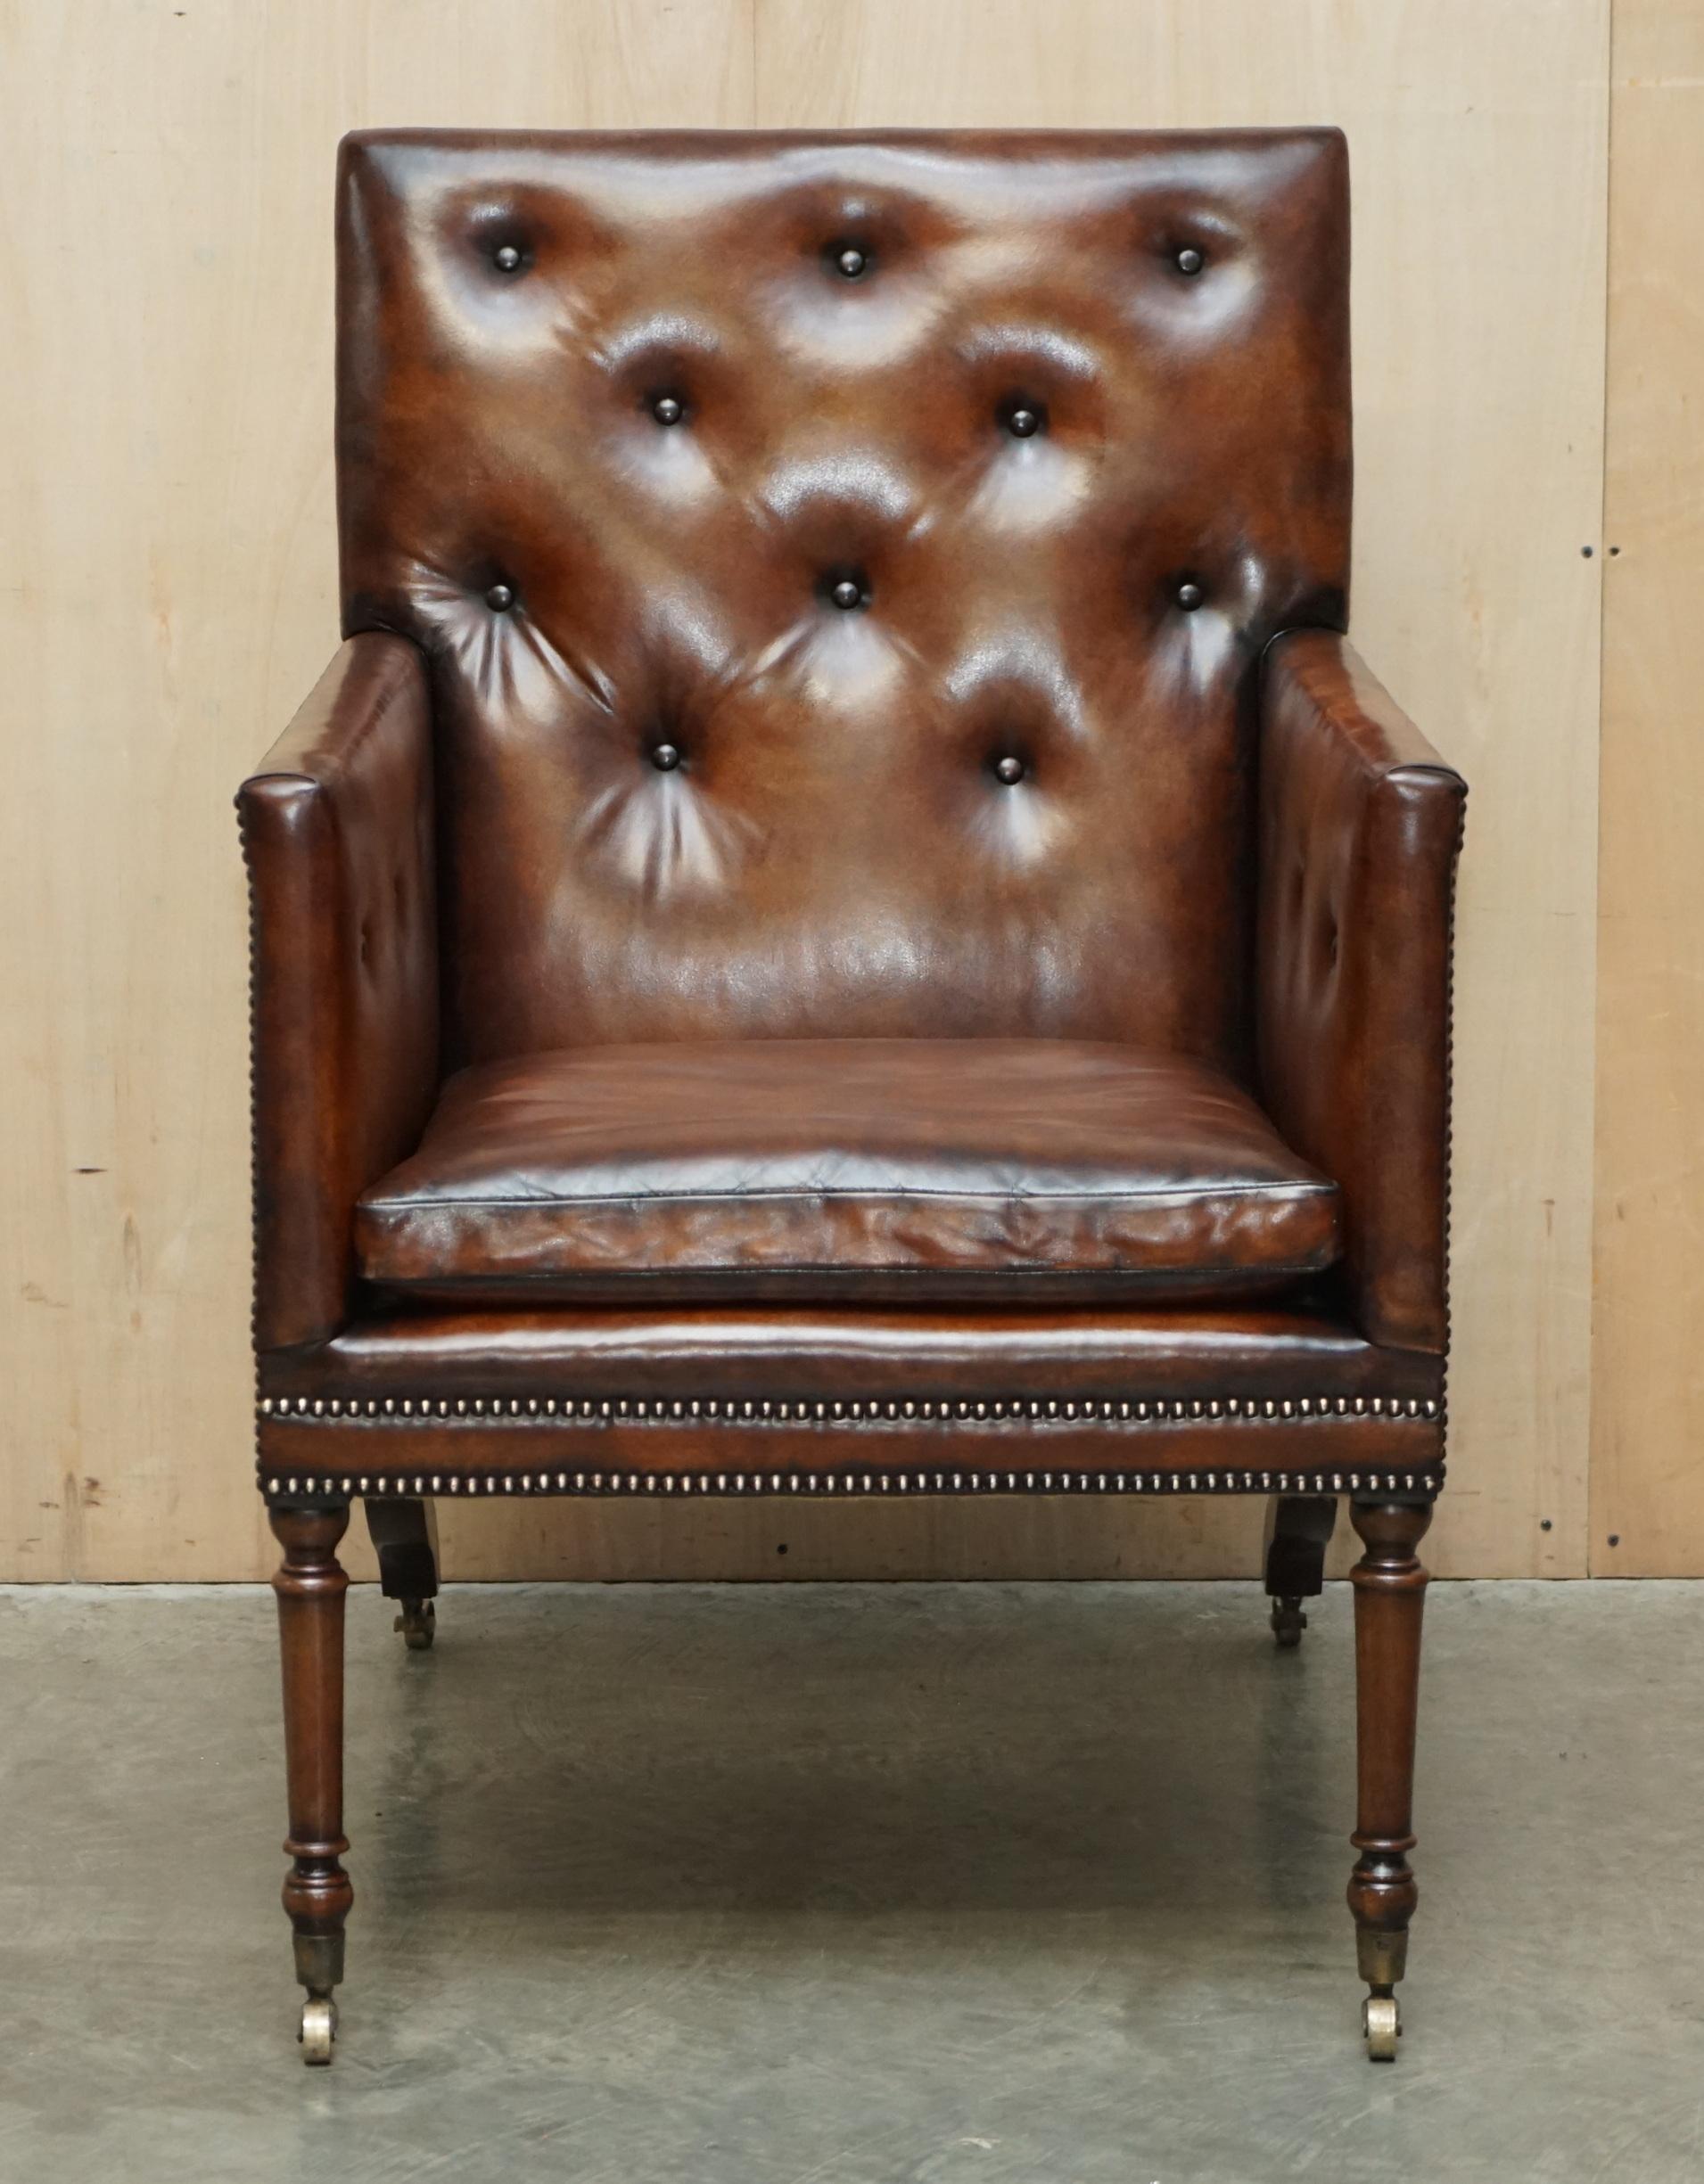 We are delighted to offer for sale this exquisite original fully restored hand dyed brown leather Chesterfield library armchair from the George III era circa 1780

A fantastic looking and well made piece, the chair has been fully restored to